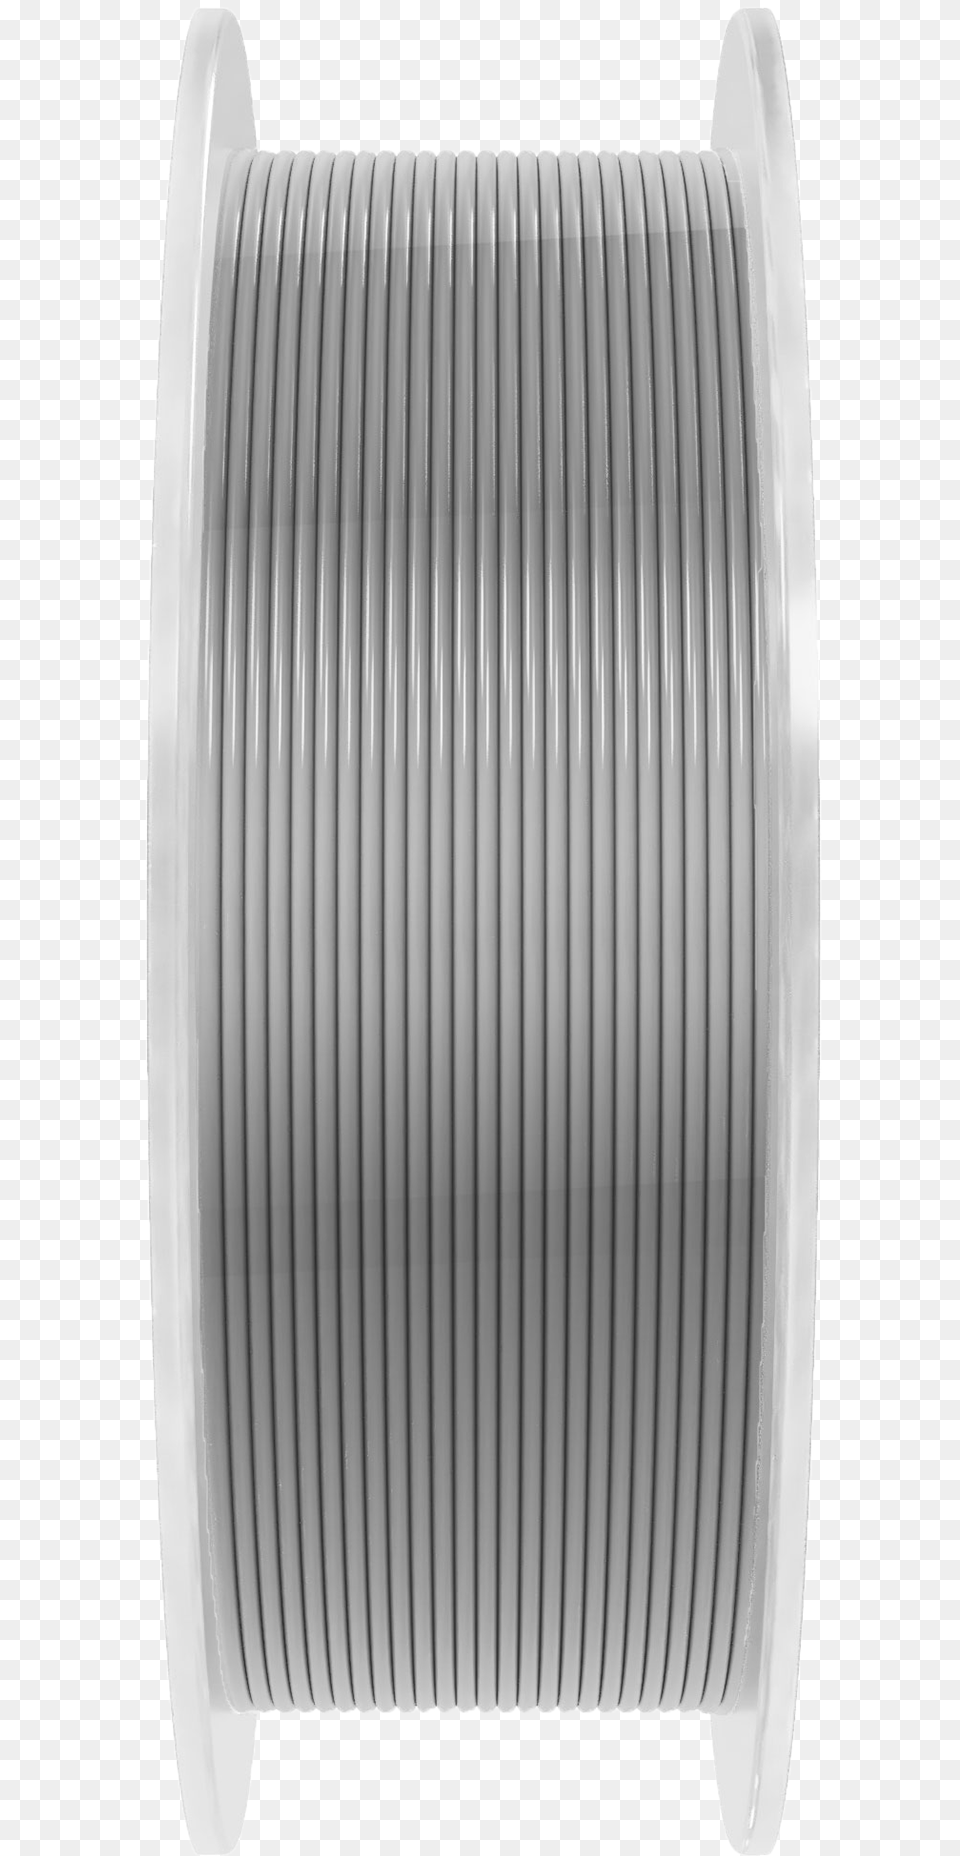 Silver, Coil, Spiral Free Transparent Png